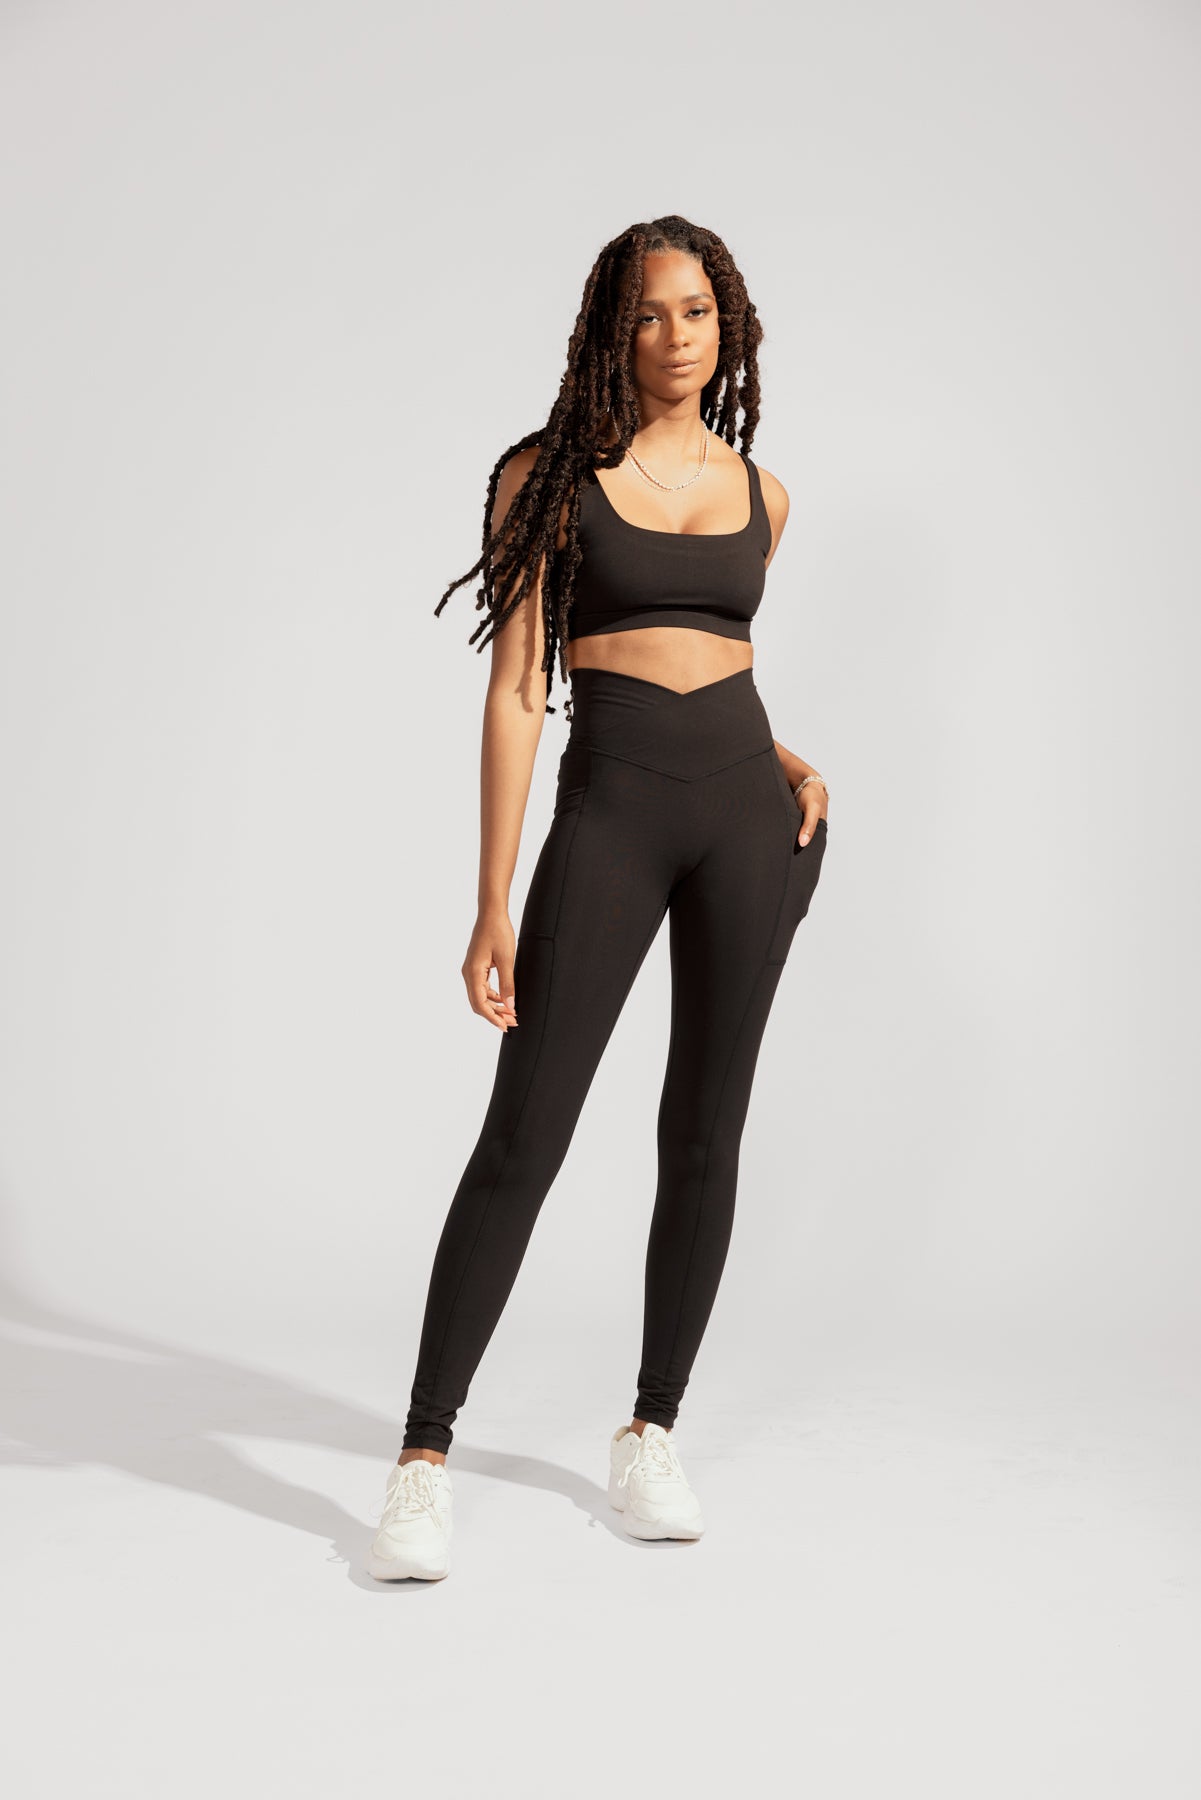 These 'Internet Famous' Leggings Could Give You an Instant Hourglass Figure